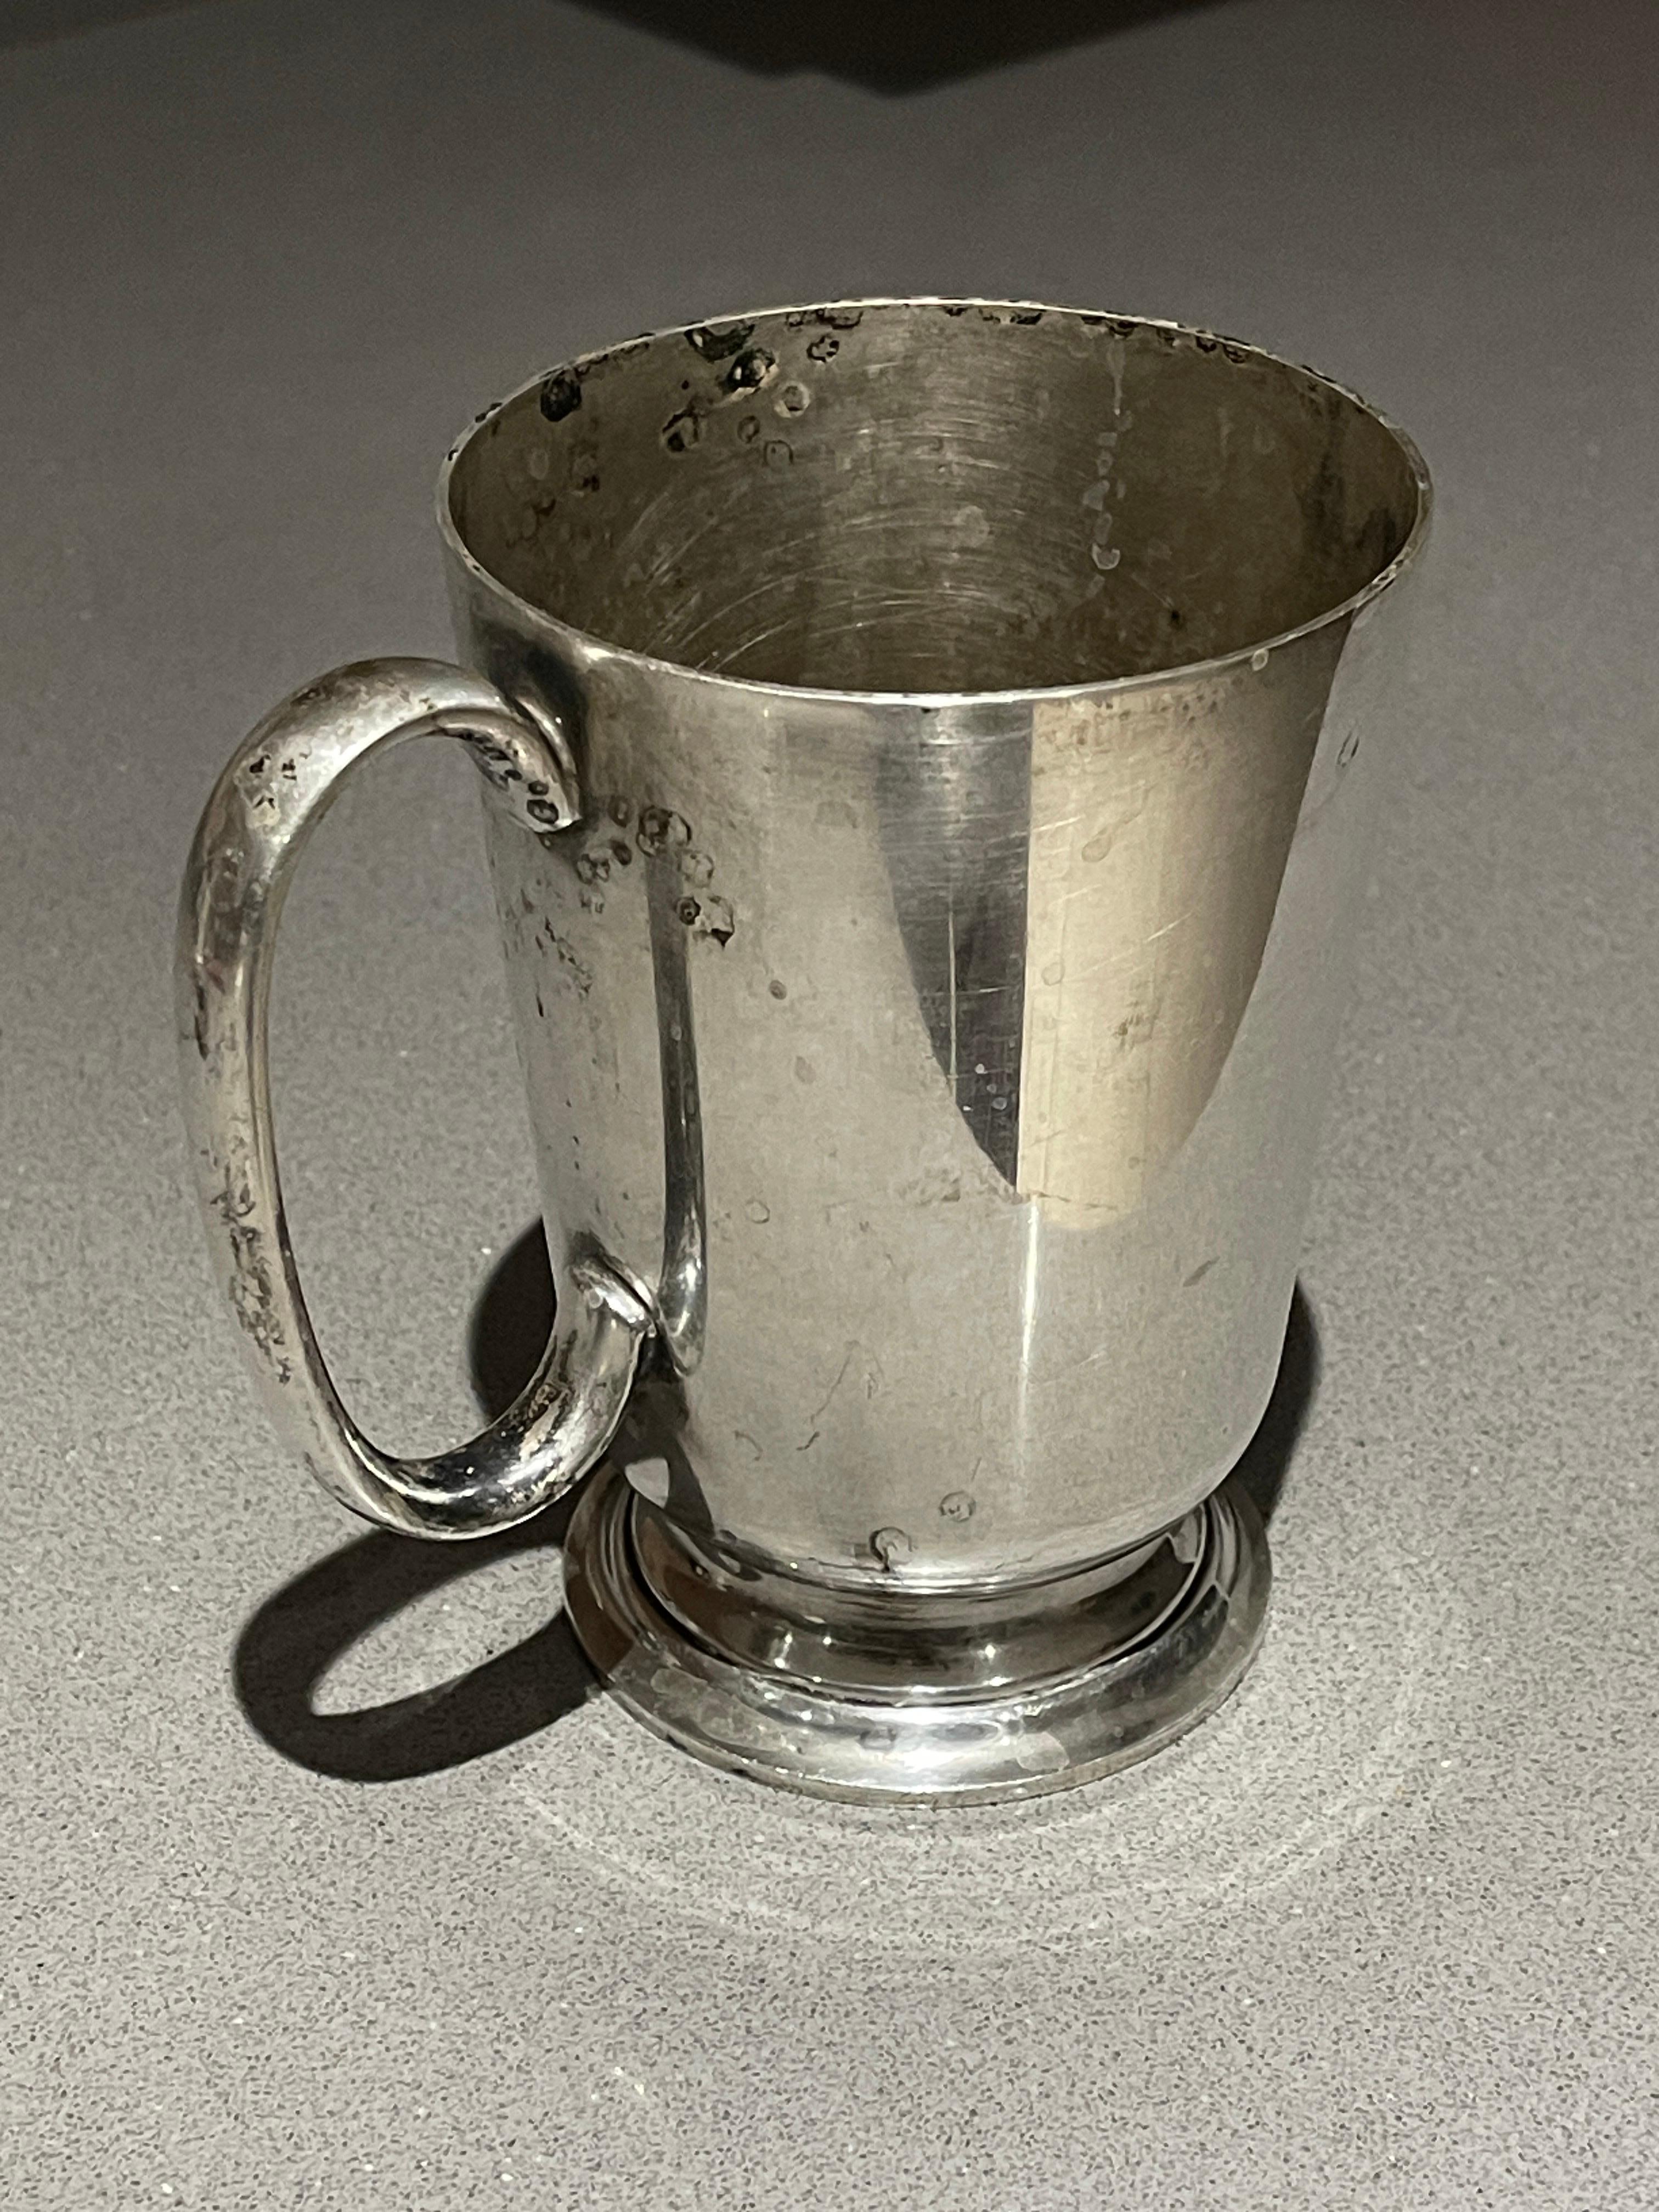 19th-century English silver plated mug or cup with handle. Measures: 5.5